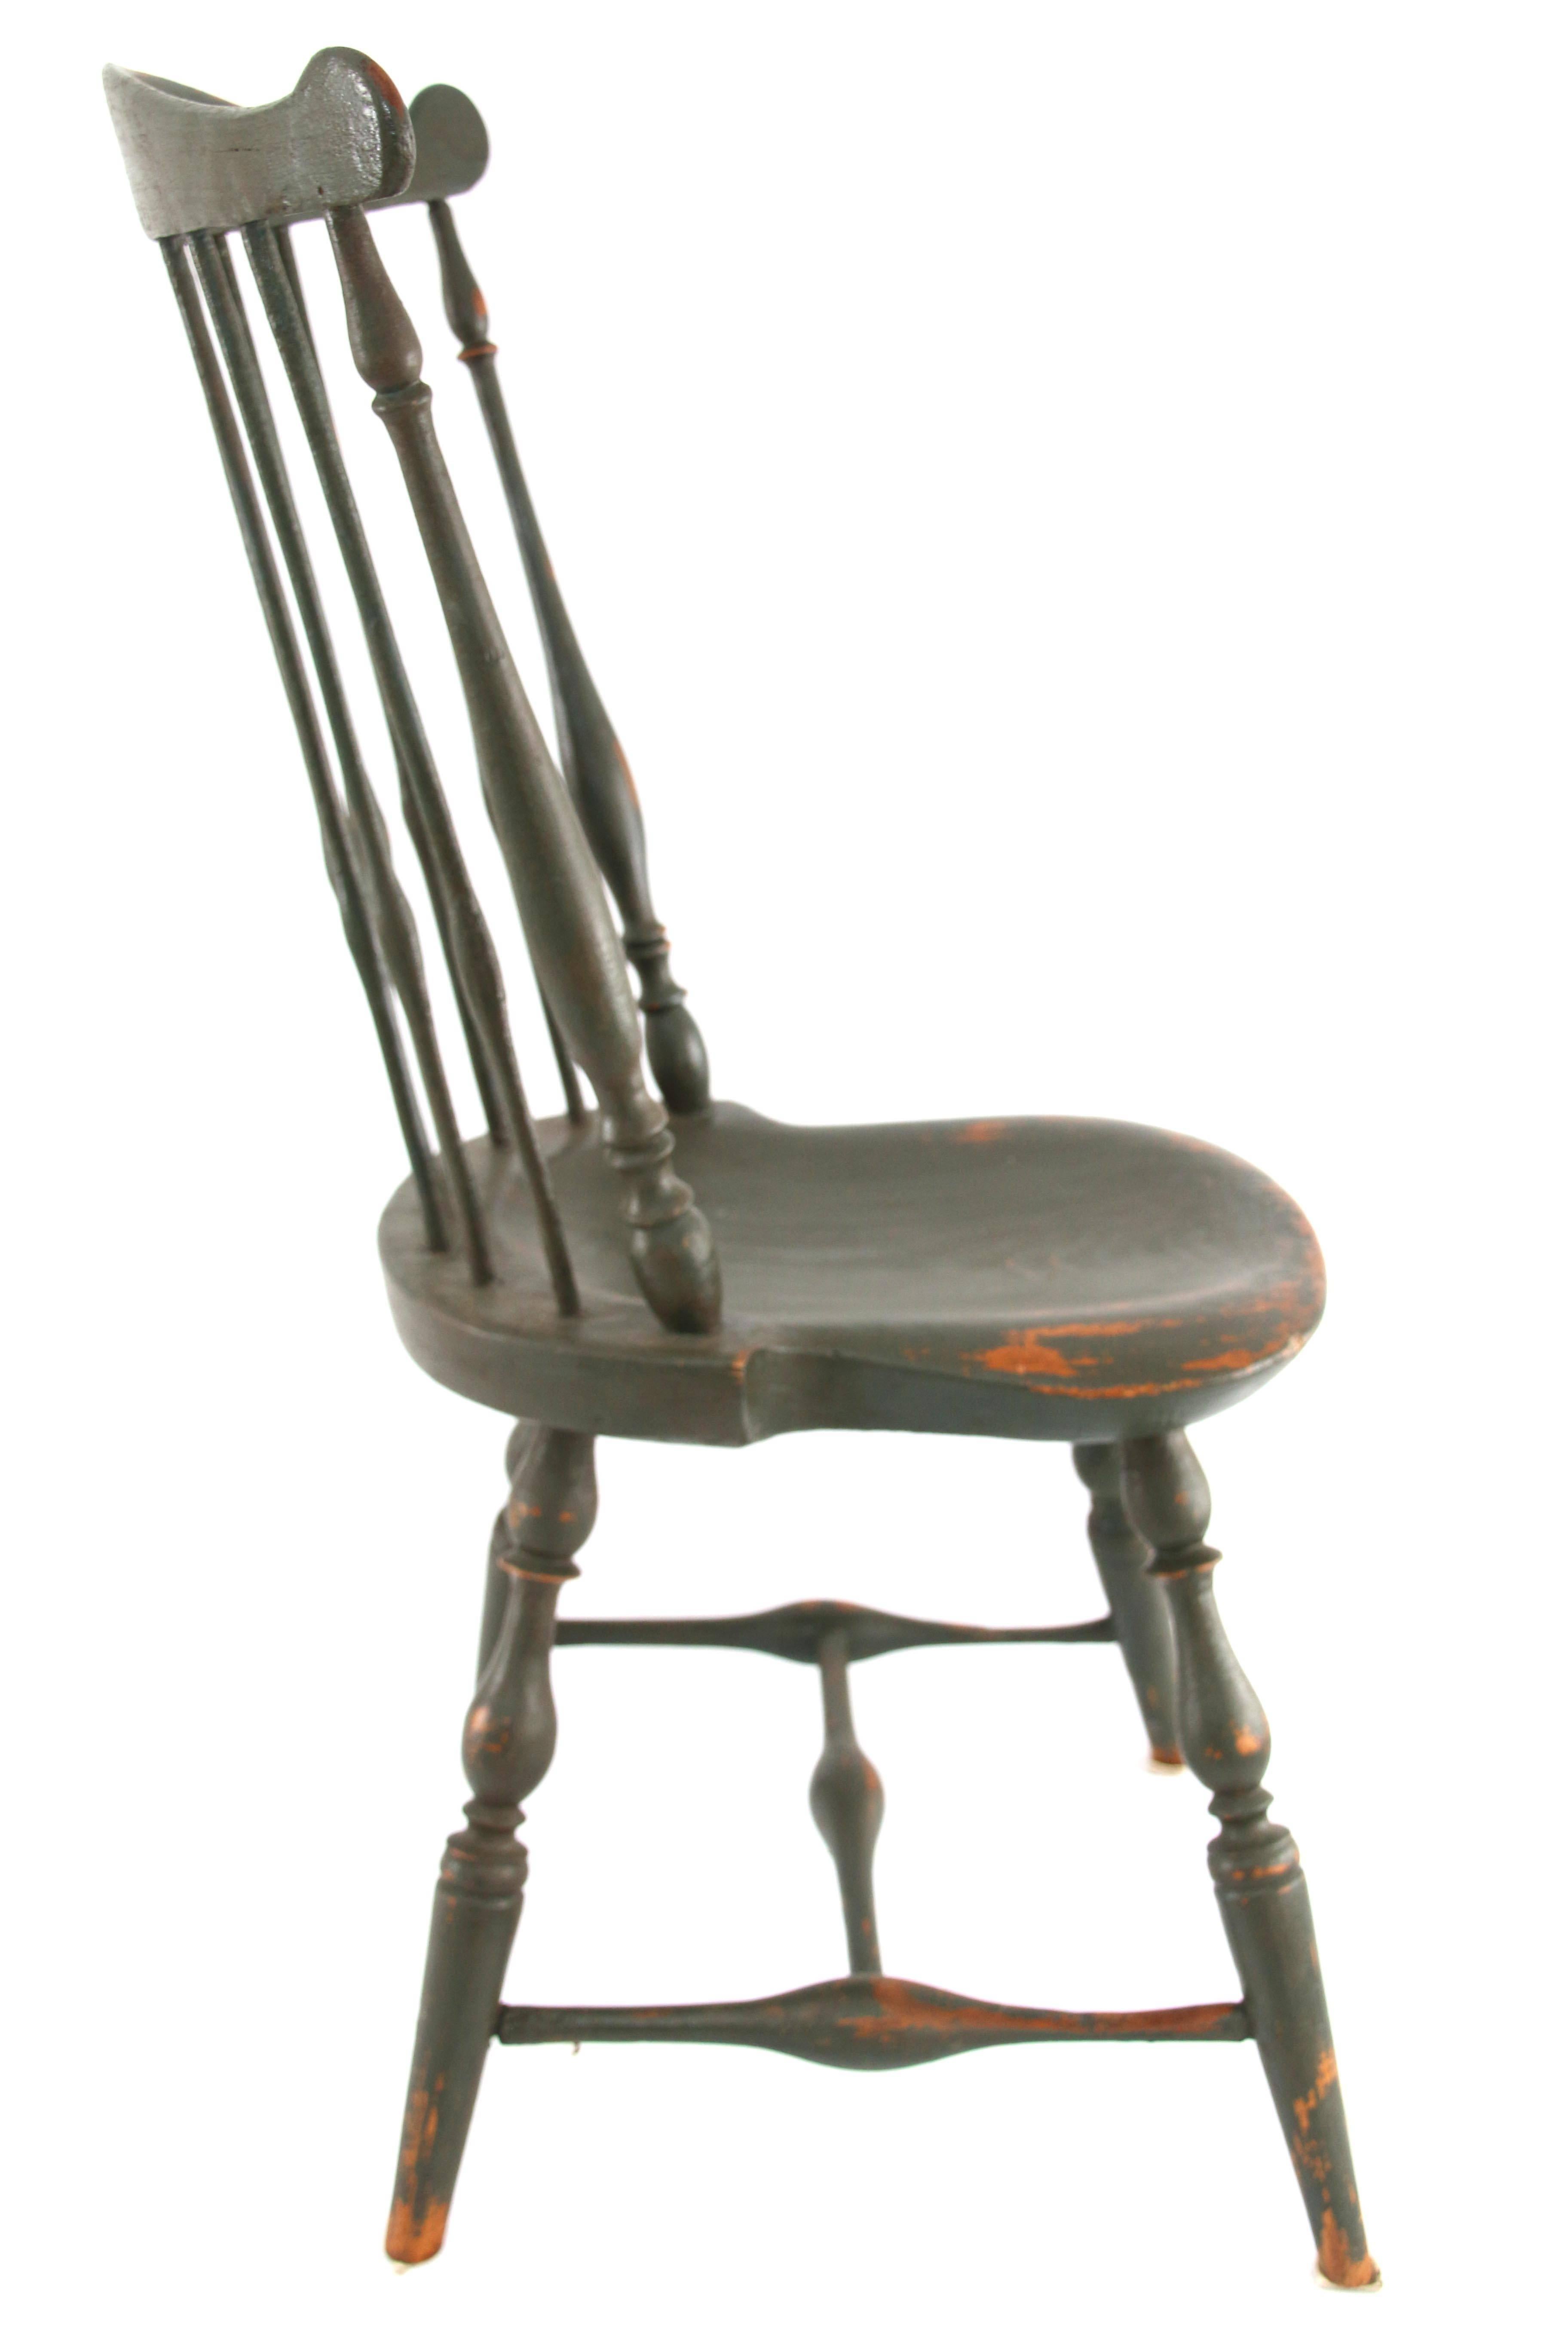 Connecticut Windsor Side Chair Signed I. Clark, circa 1800 In Excellent Condition For Sale In Woodbury, CT